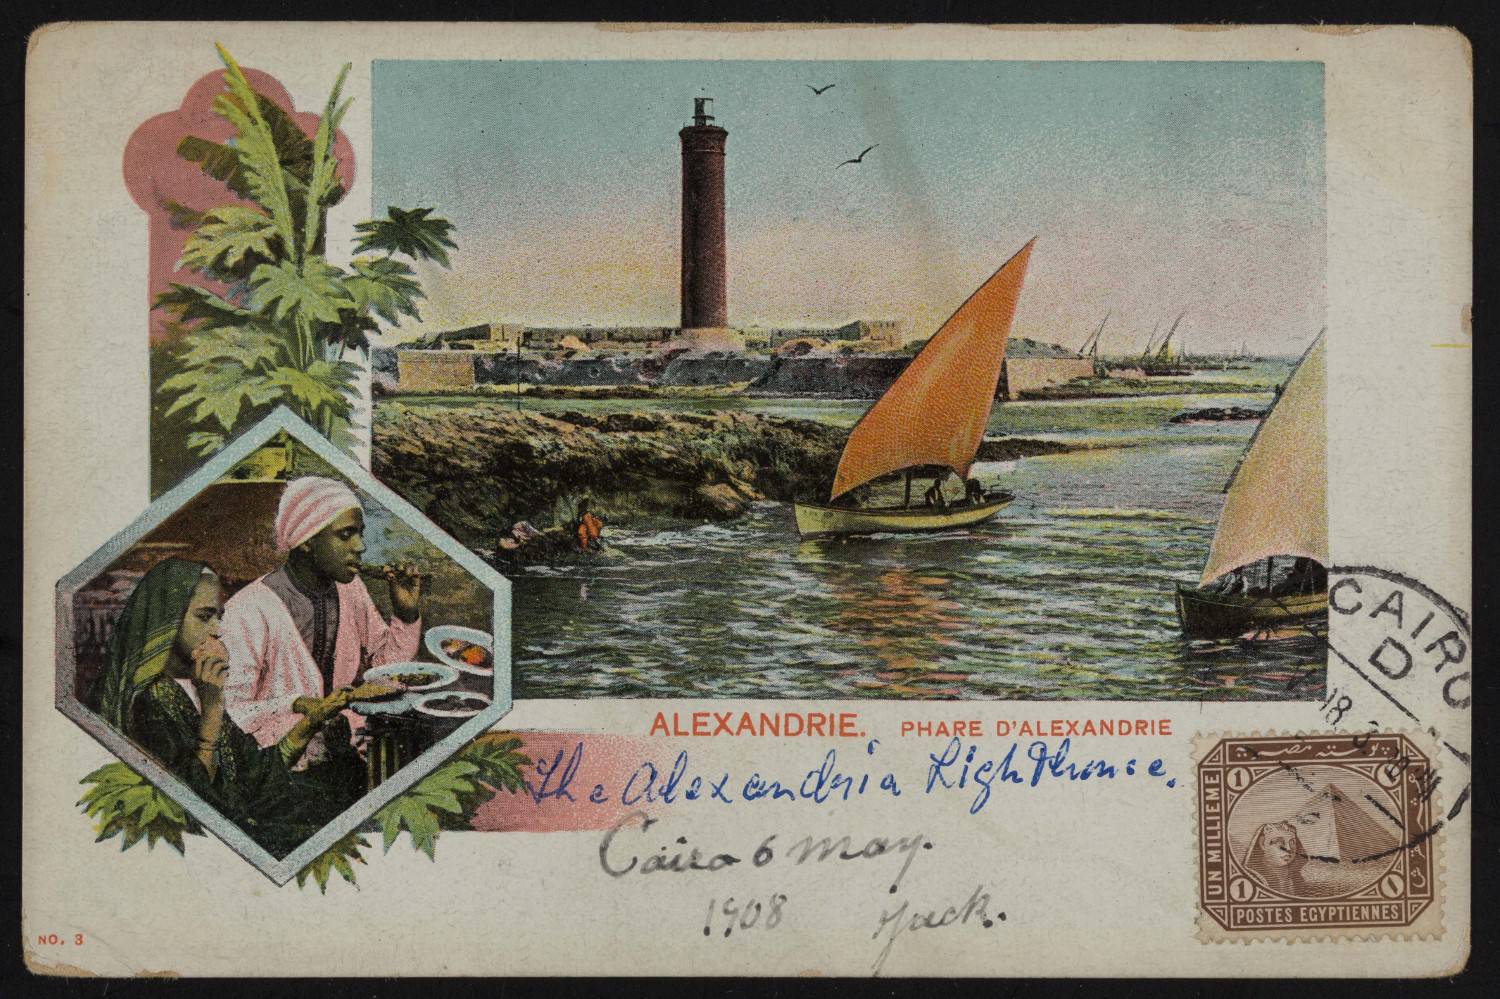 Postcard of the Lighthouse of Alexandria